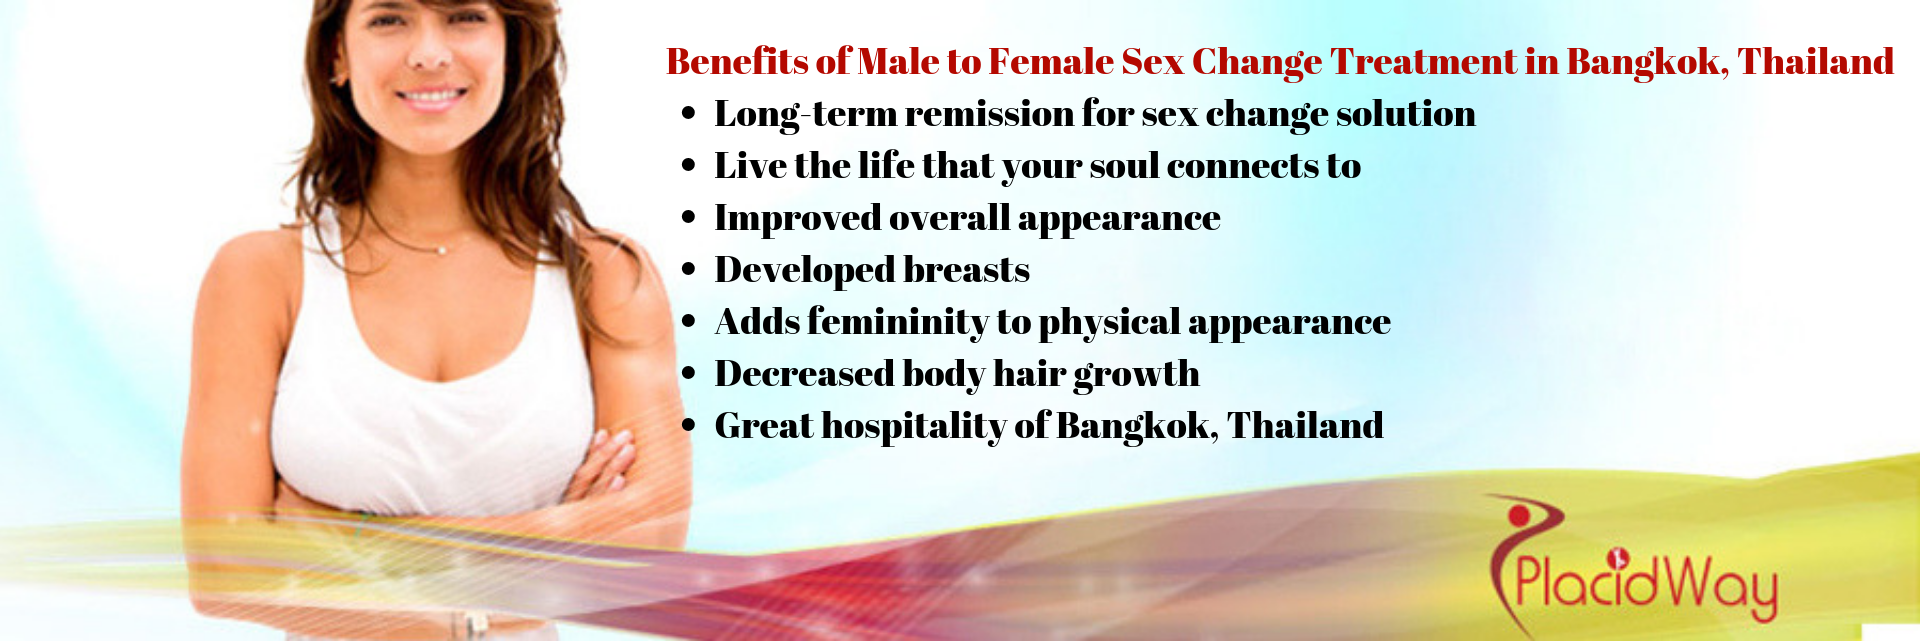 Benefits of Male to Female Sex Change Treatment in Bangkok, Thailand